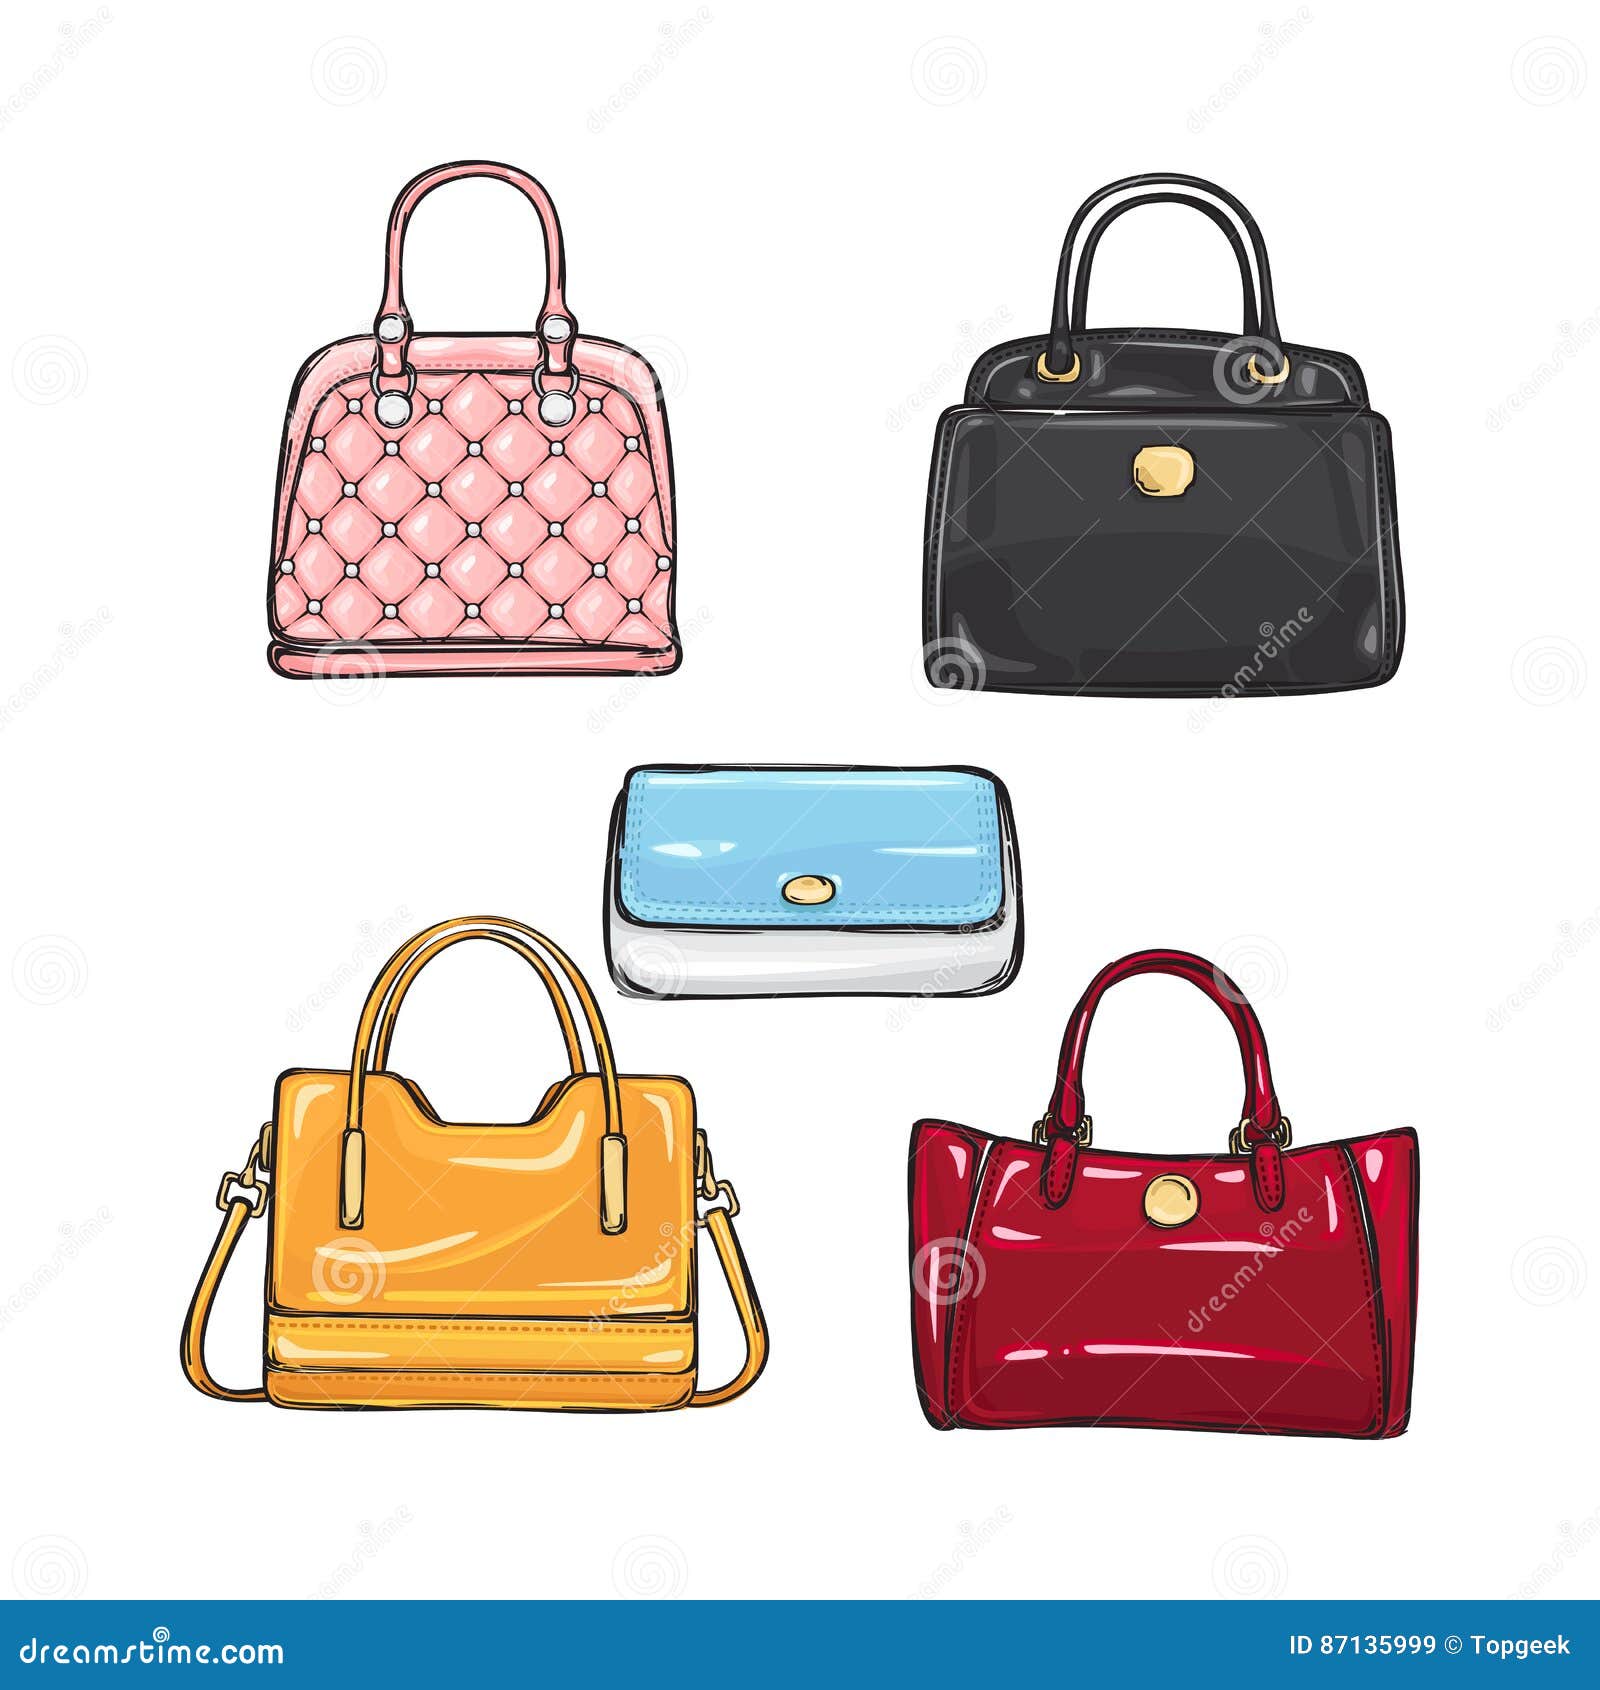 collection different handbags women illustrations various shape size colour pink black yellow blue red purses 87135999